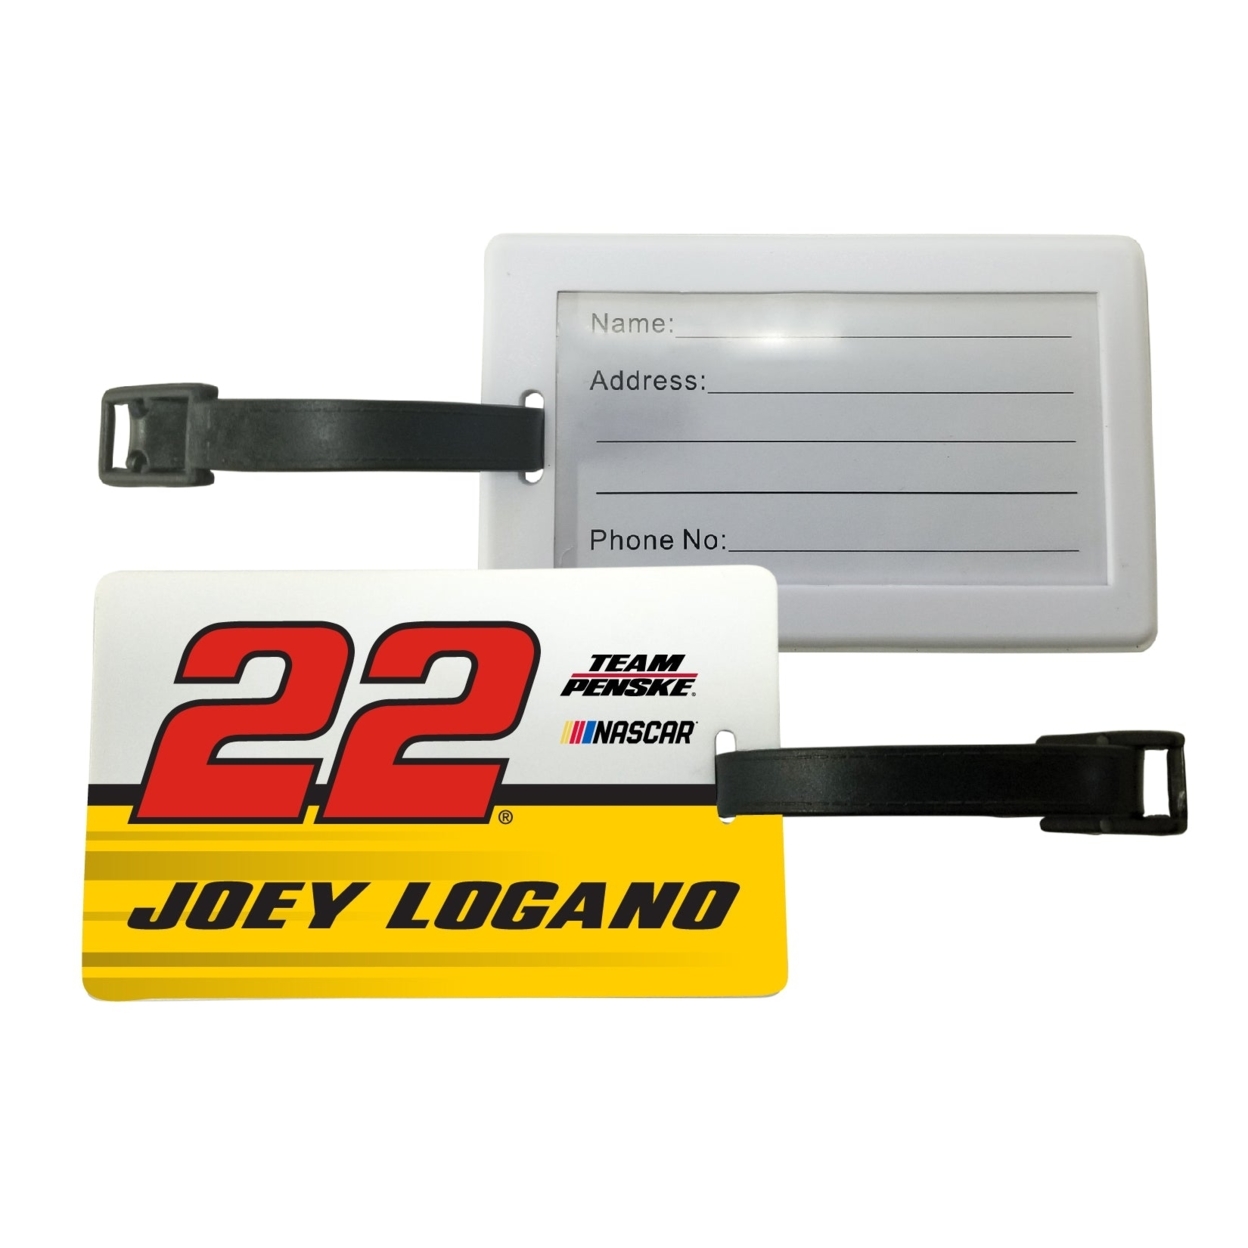 #22 Joey Logano Officially Licensed Luggage Tag